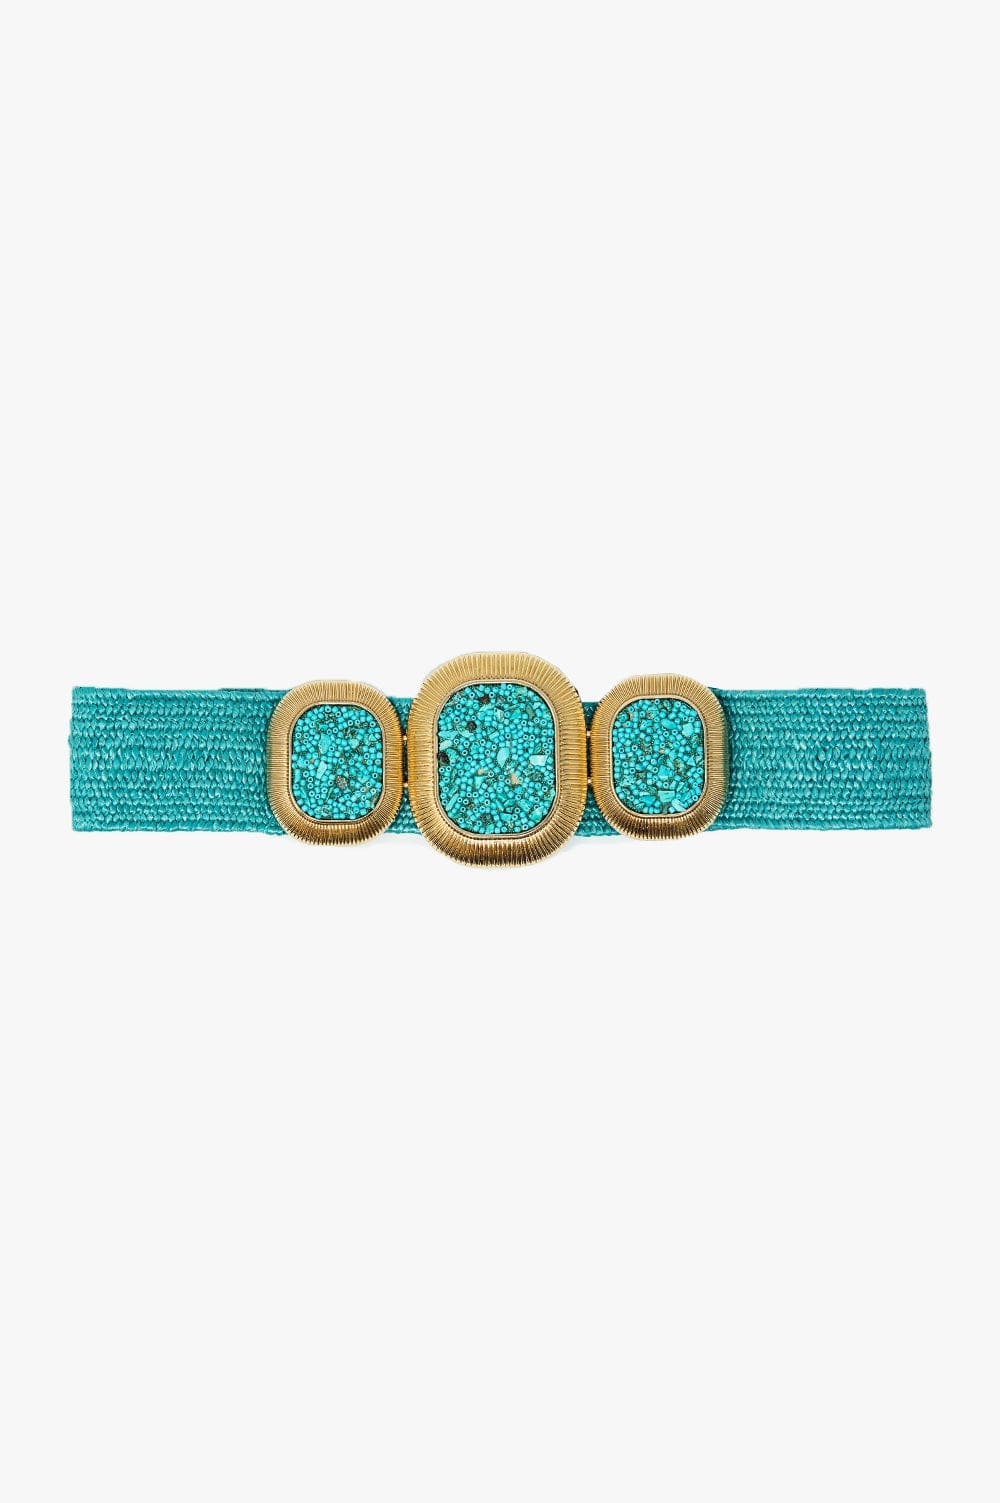 Q2 Women's Belt One Size / Green Turquoise Woven Belt With Rectangular Buckle With Beads